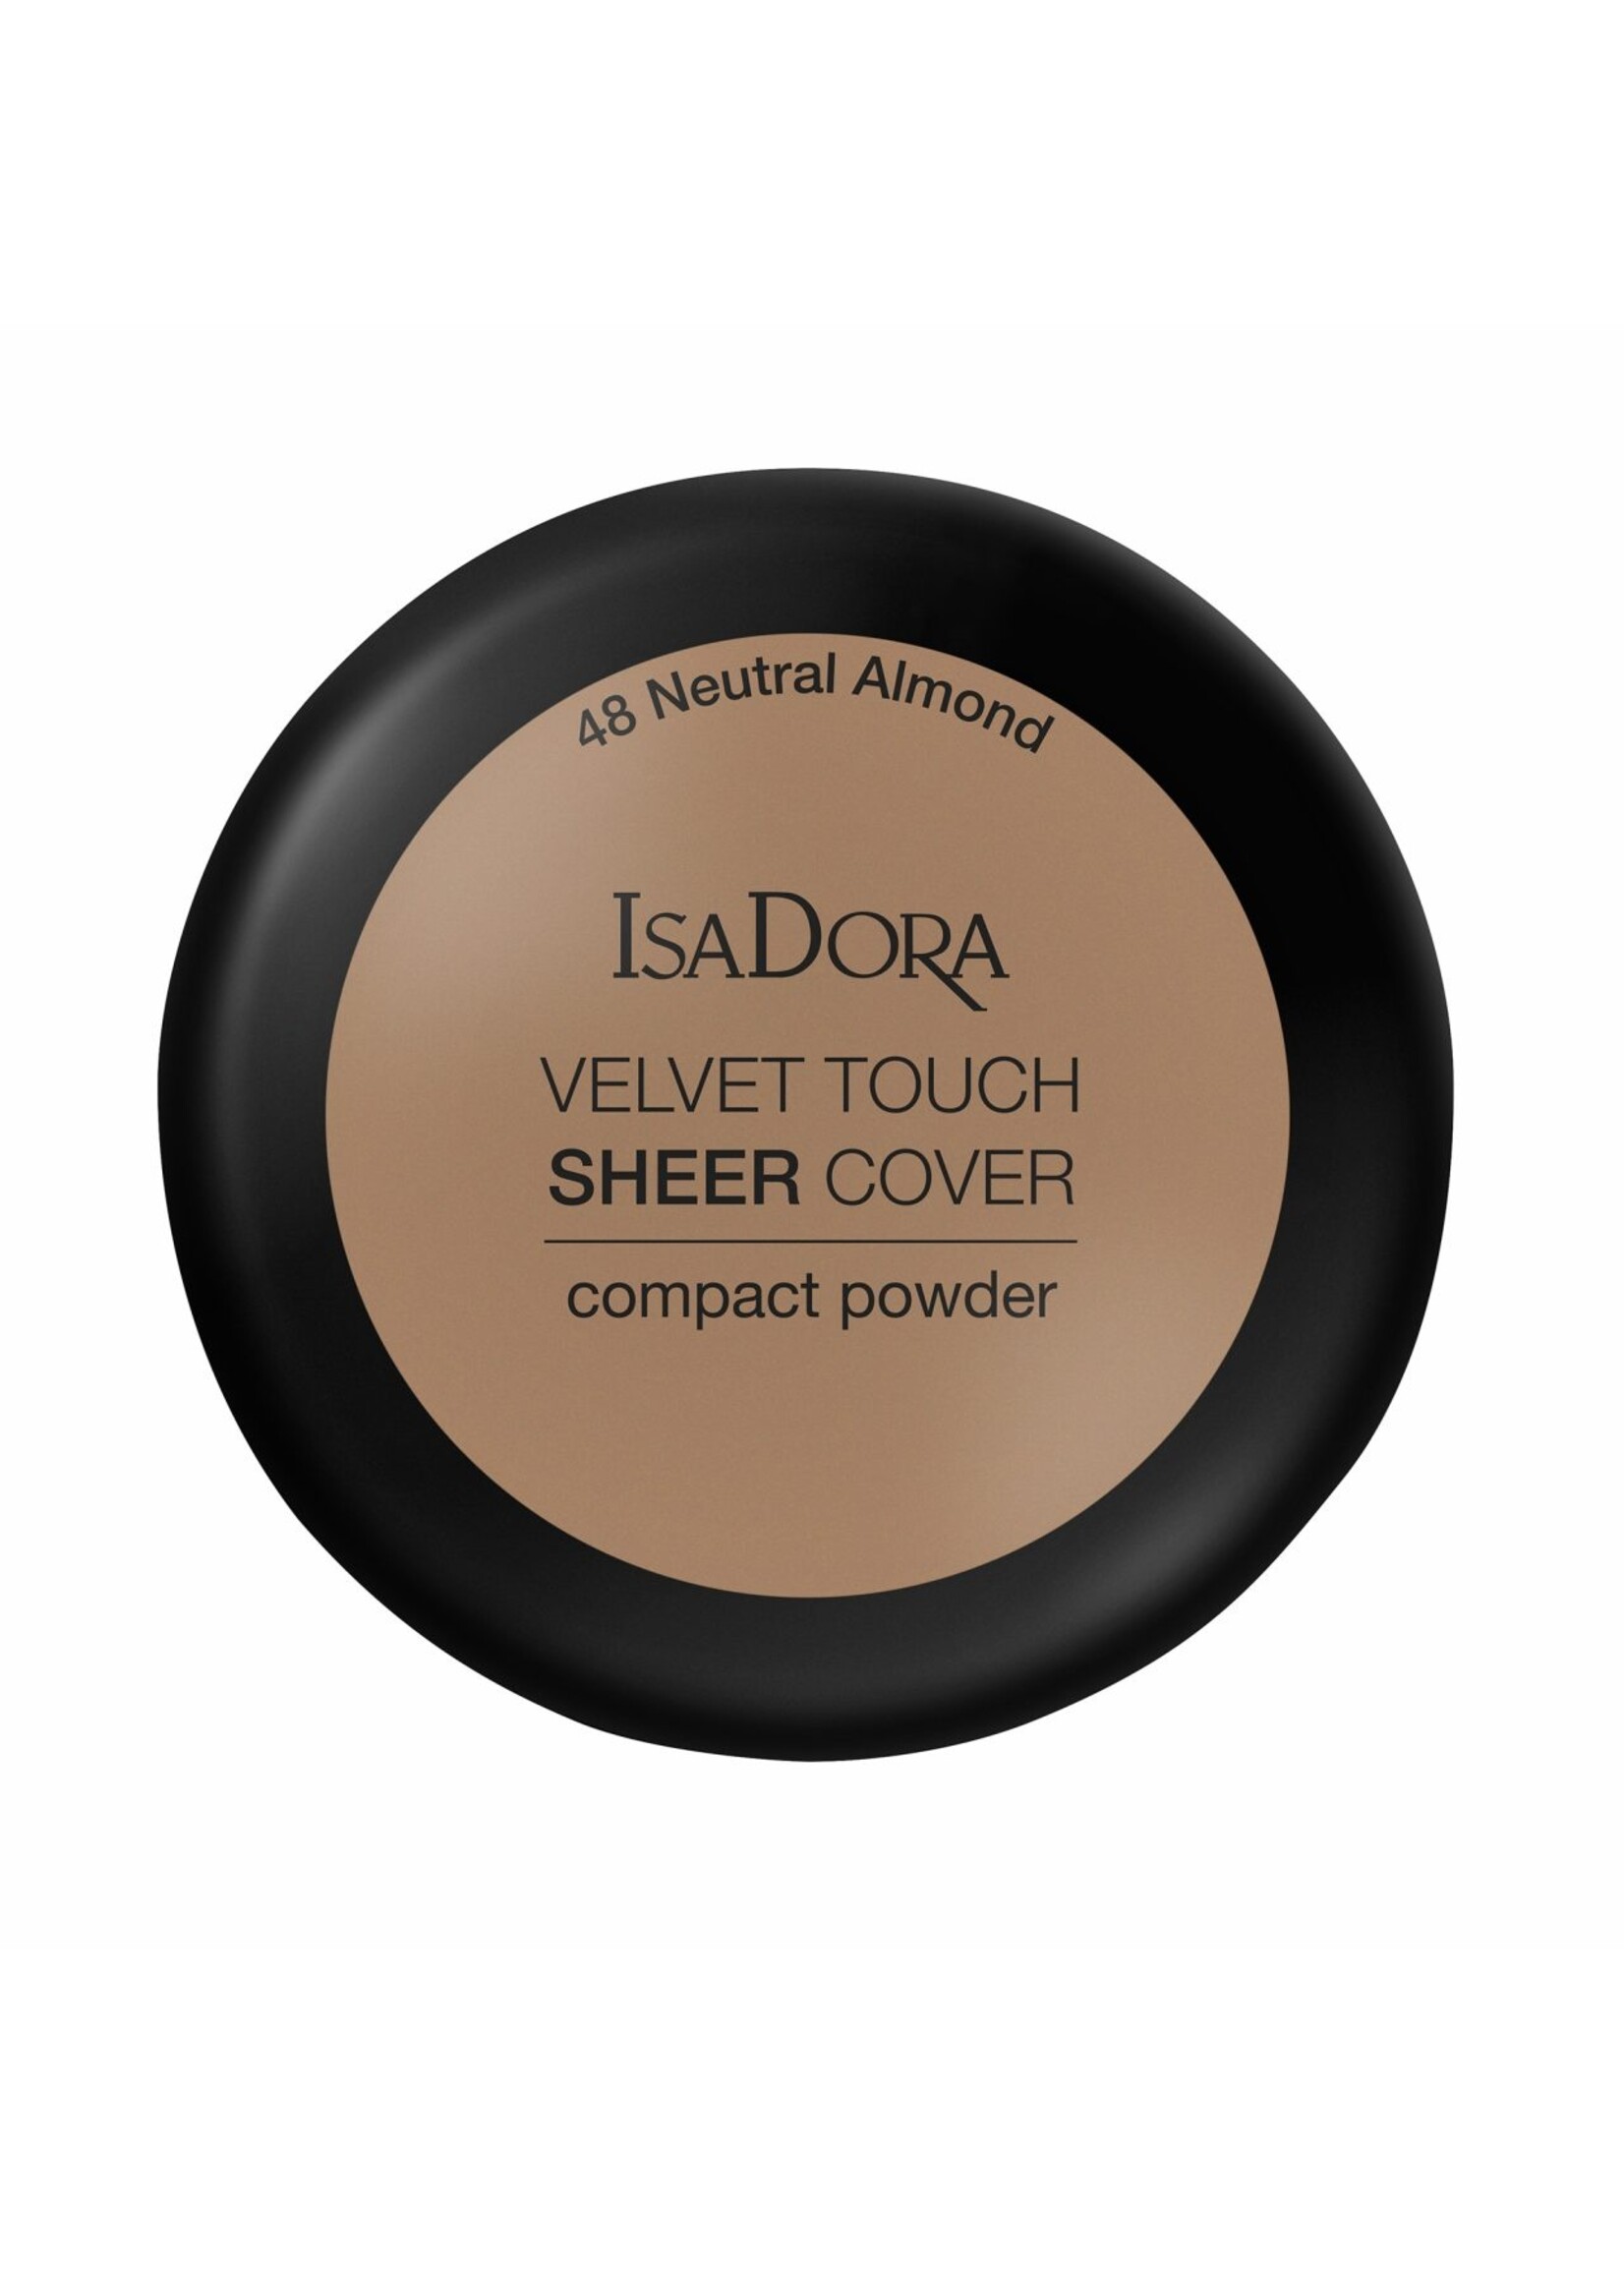 Isadora  Neutral Almond 48 - Velvet Touch Sheer Cover - Compact Powder